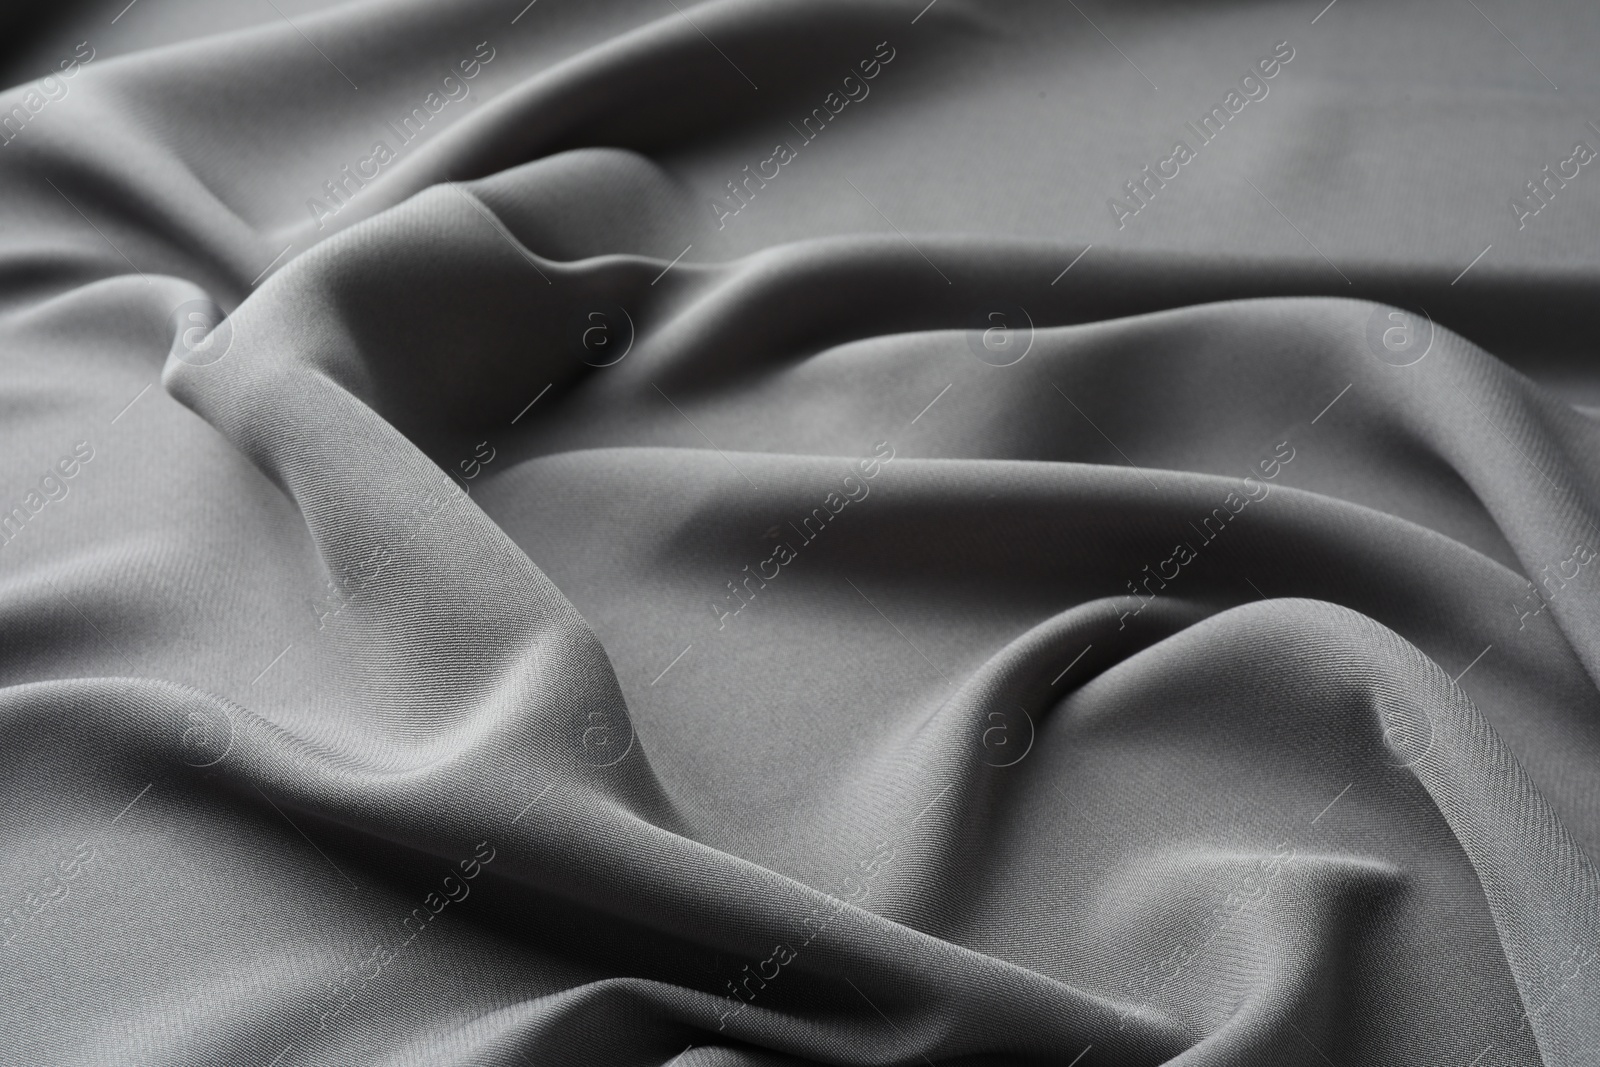 Photo of Texture of grey crumpled silk fabric as background, closeup